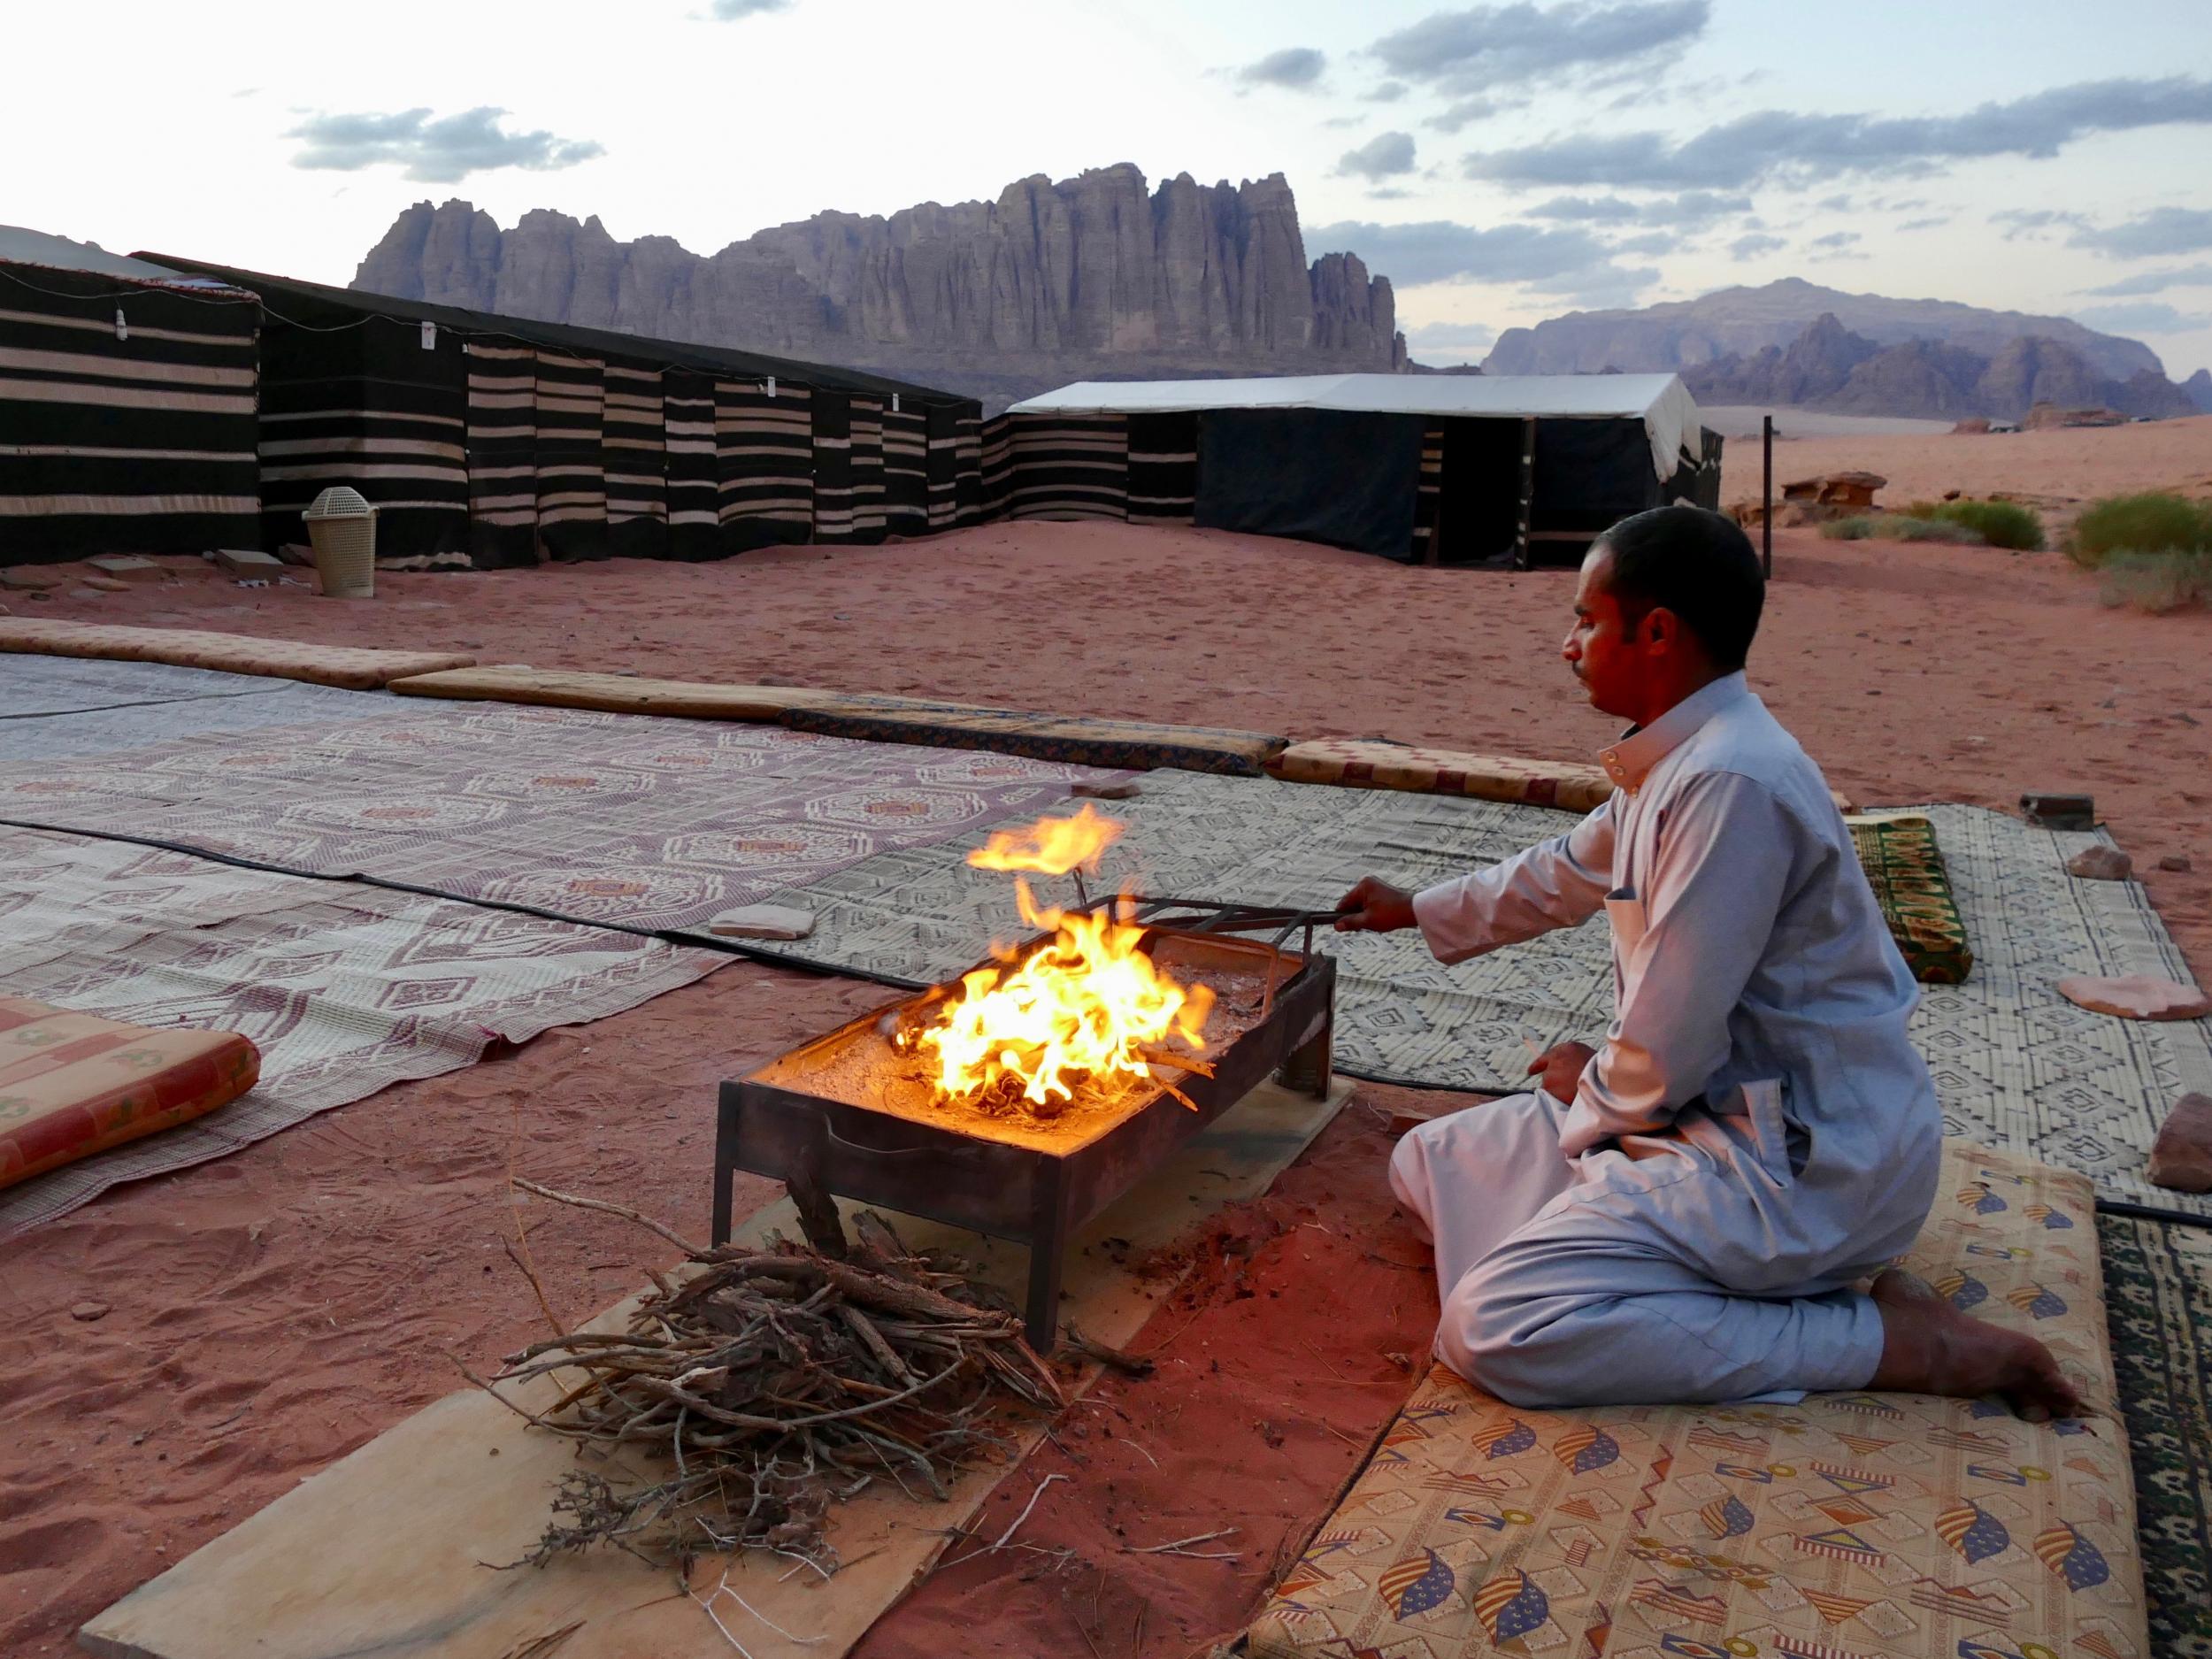 Embrace the Bedouin life at the desert camp in Wadi Rum